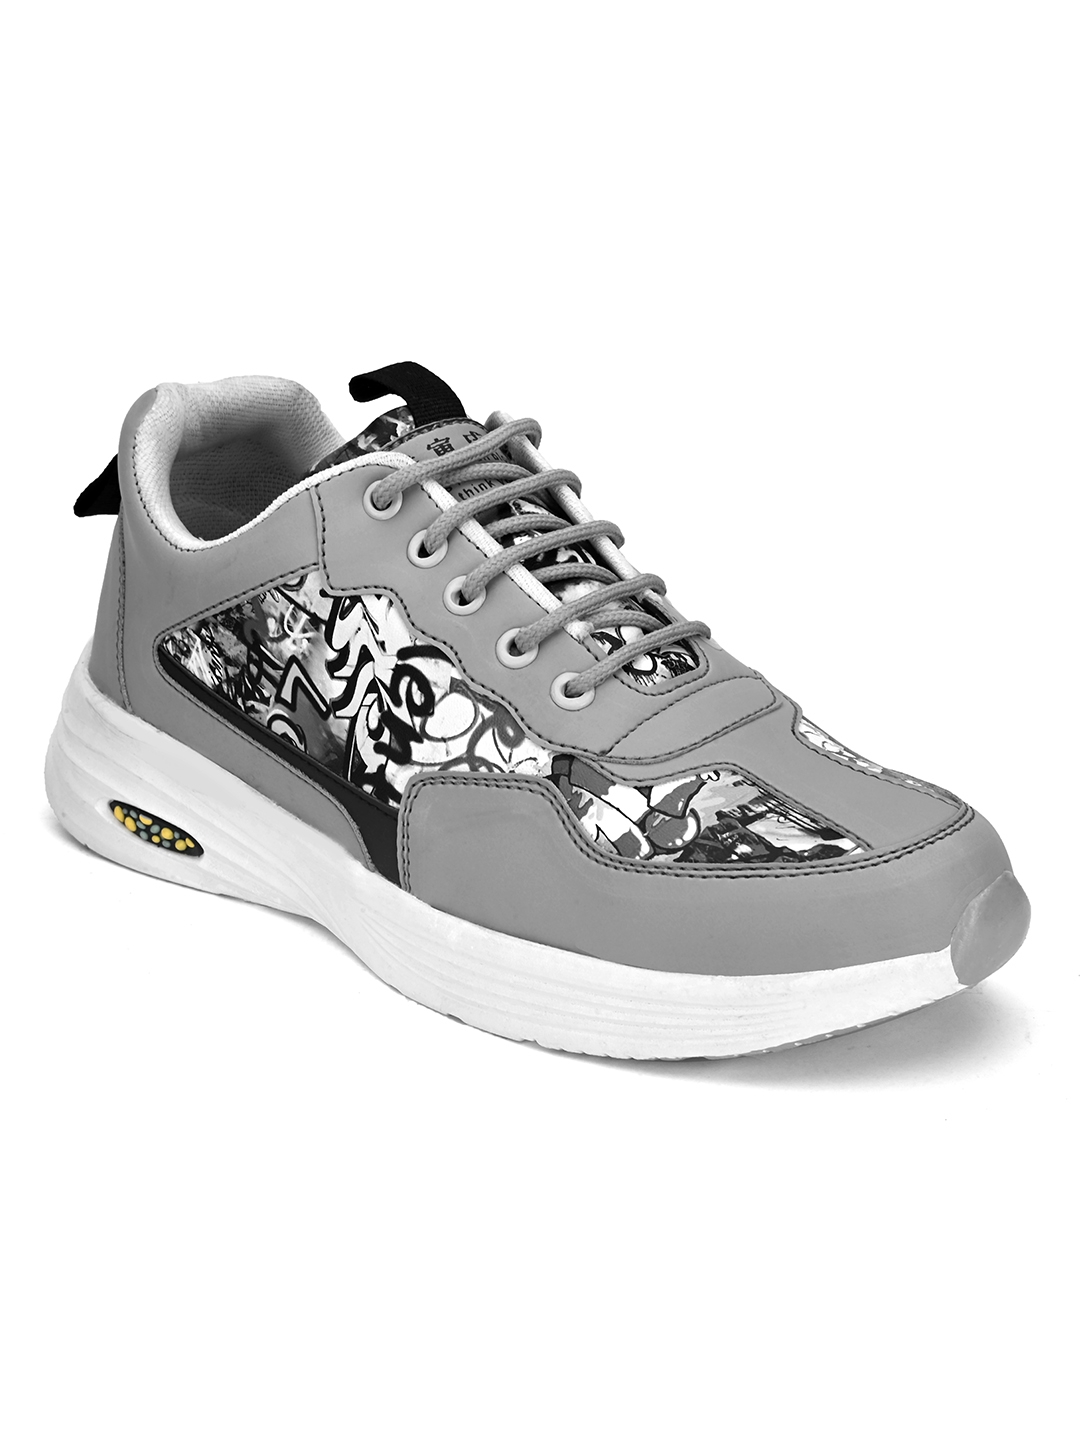 RAY J | RAY J Grey Lace-Up Sneakers For Men 0